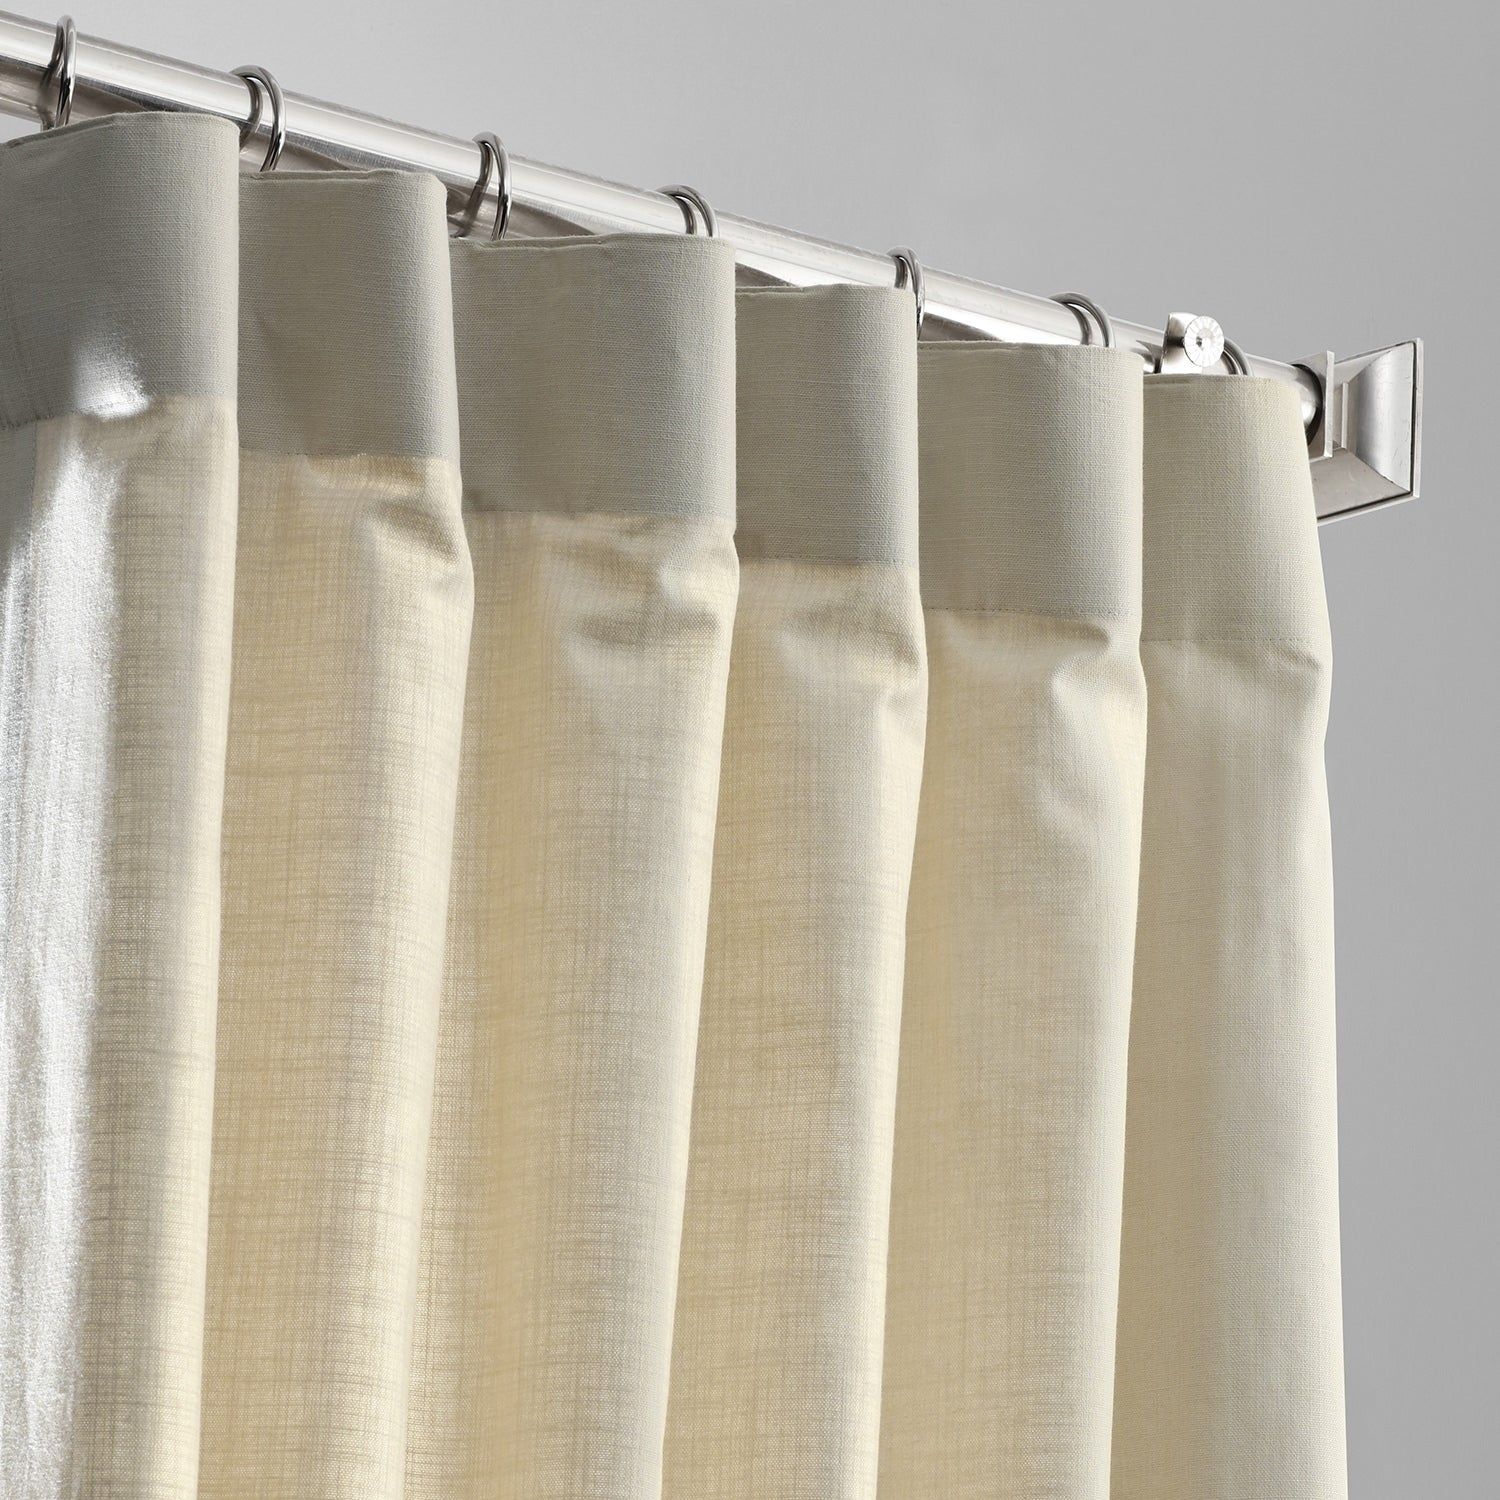 Exclusive Fabrics Solid Country Cotton Linen Weave Curtain Panel Intended For Solid Country Cotton Linen Weave Curtain Panels (View 26 of 30)